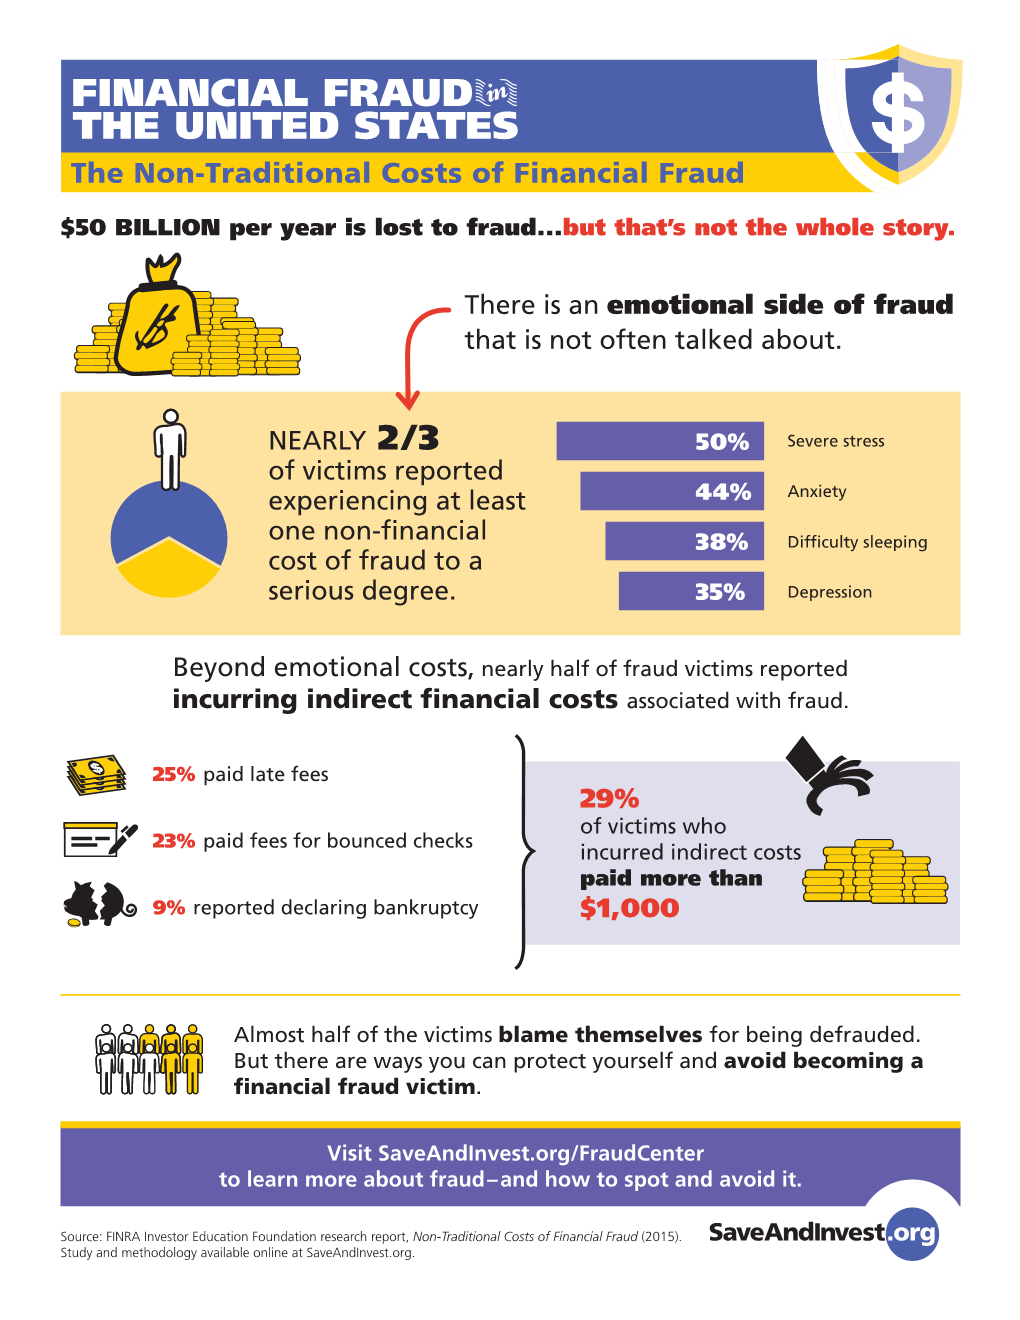 Non-Traditional Costs of Financial Fraud